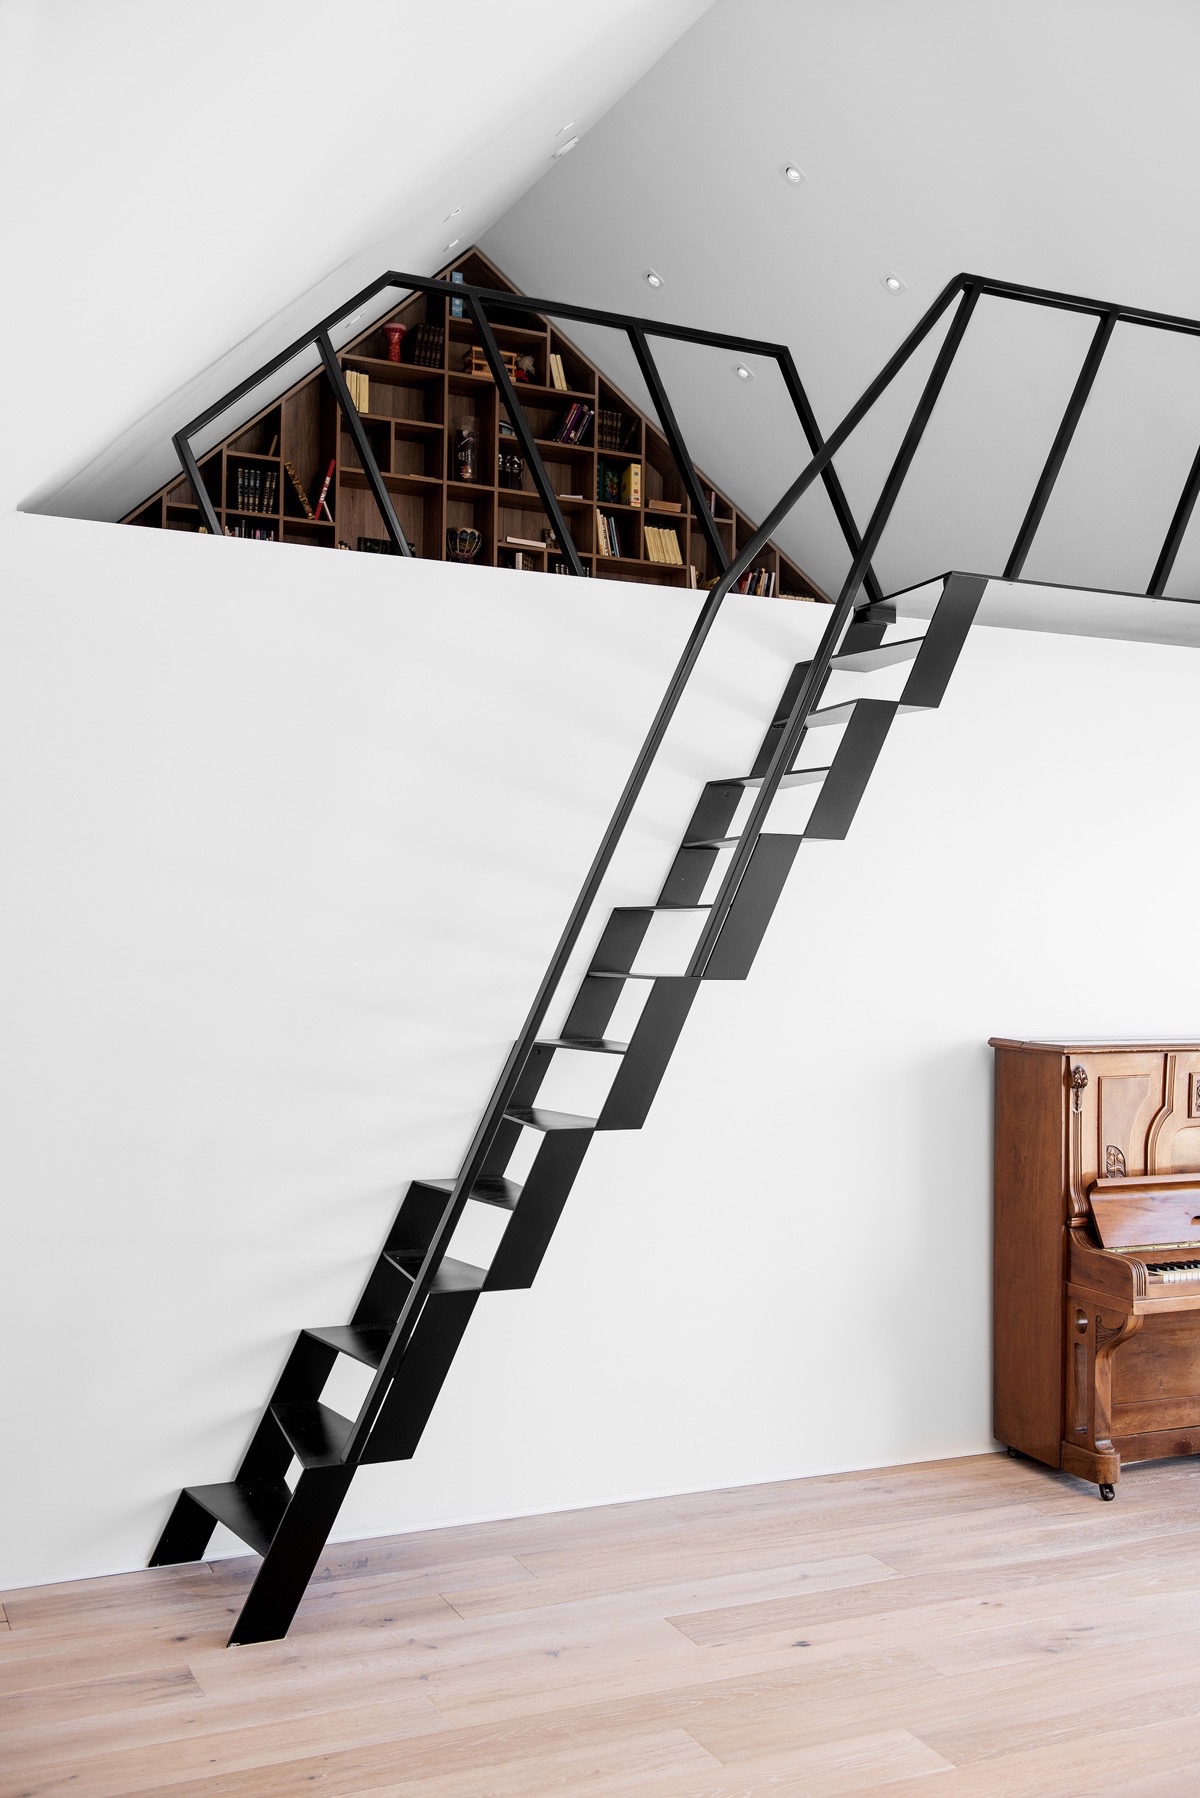 Cat ladder style staircases are good solution in limited space, like when access to a mezzanine level is required from a main living area.